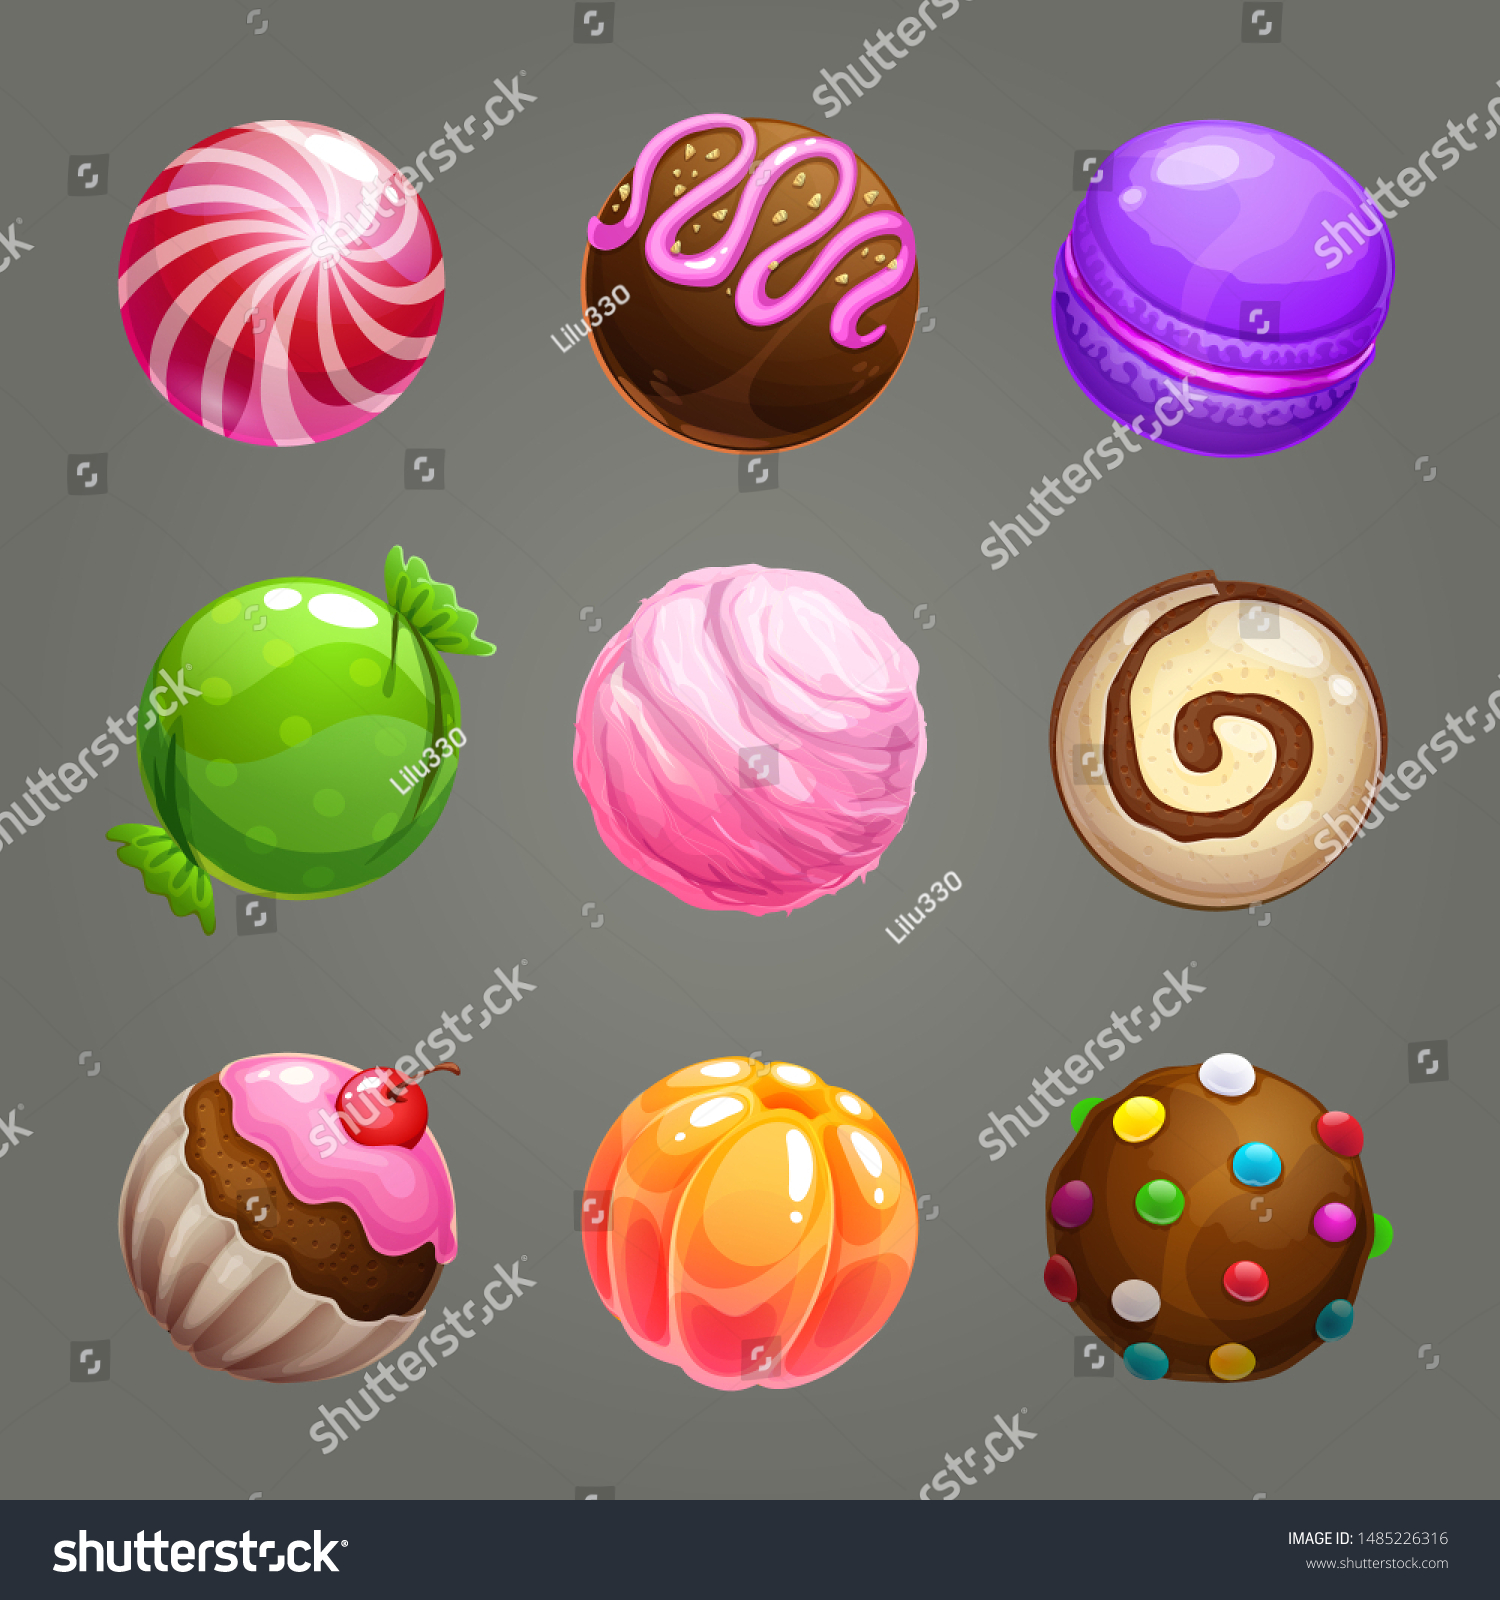 stock-vector-candy-balls-set-round-sweet-assets-for-game-design-vector-gui-elements-1485226316